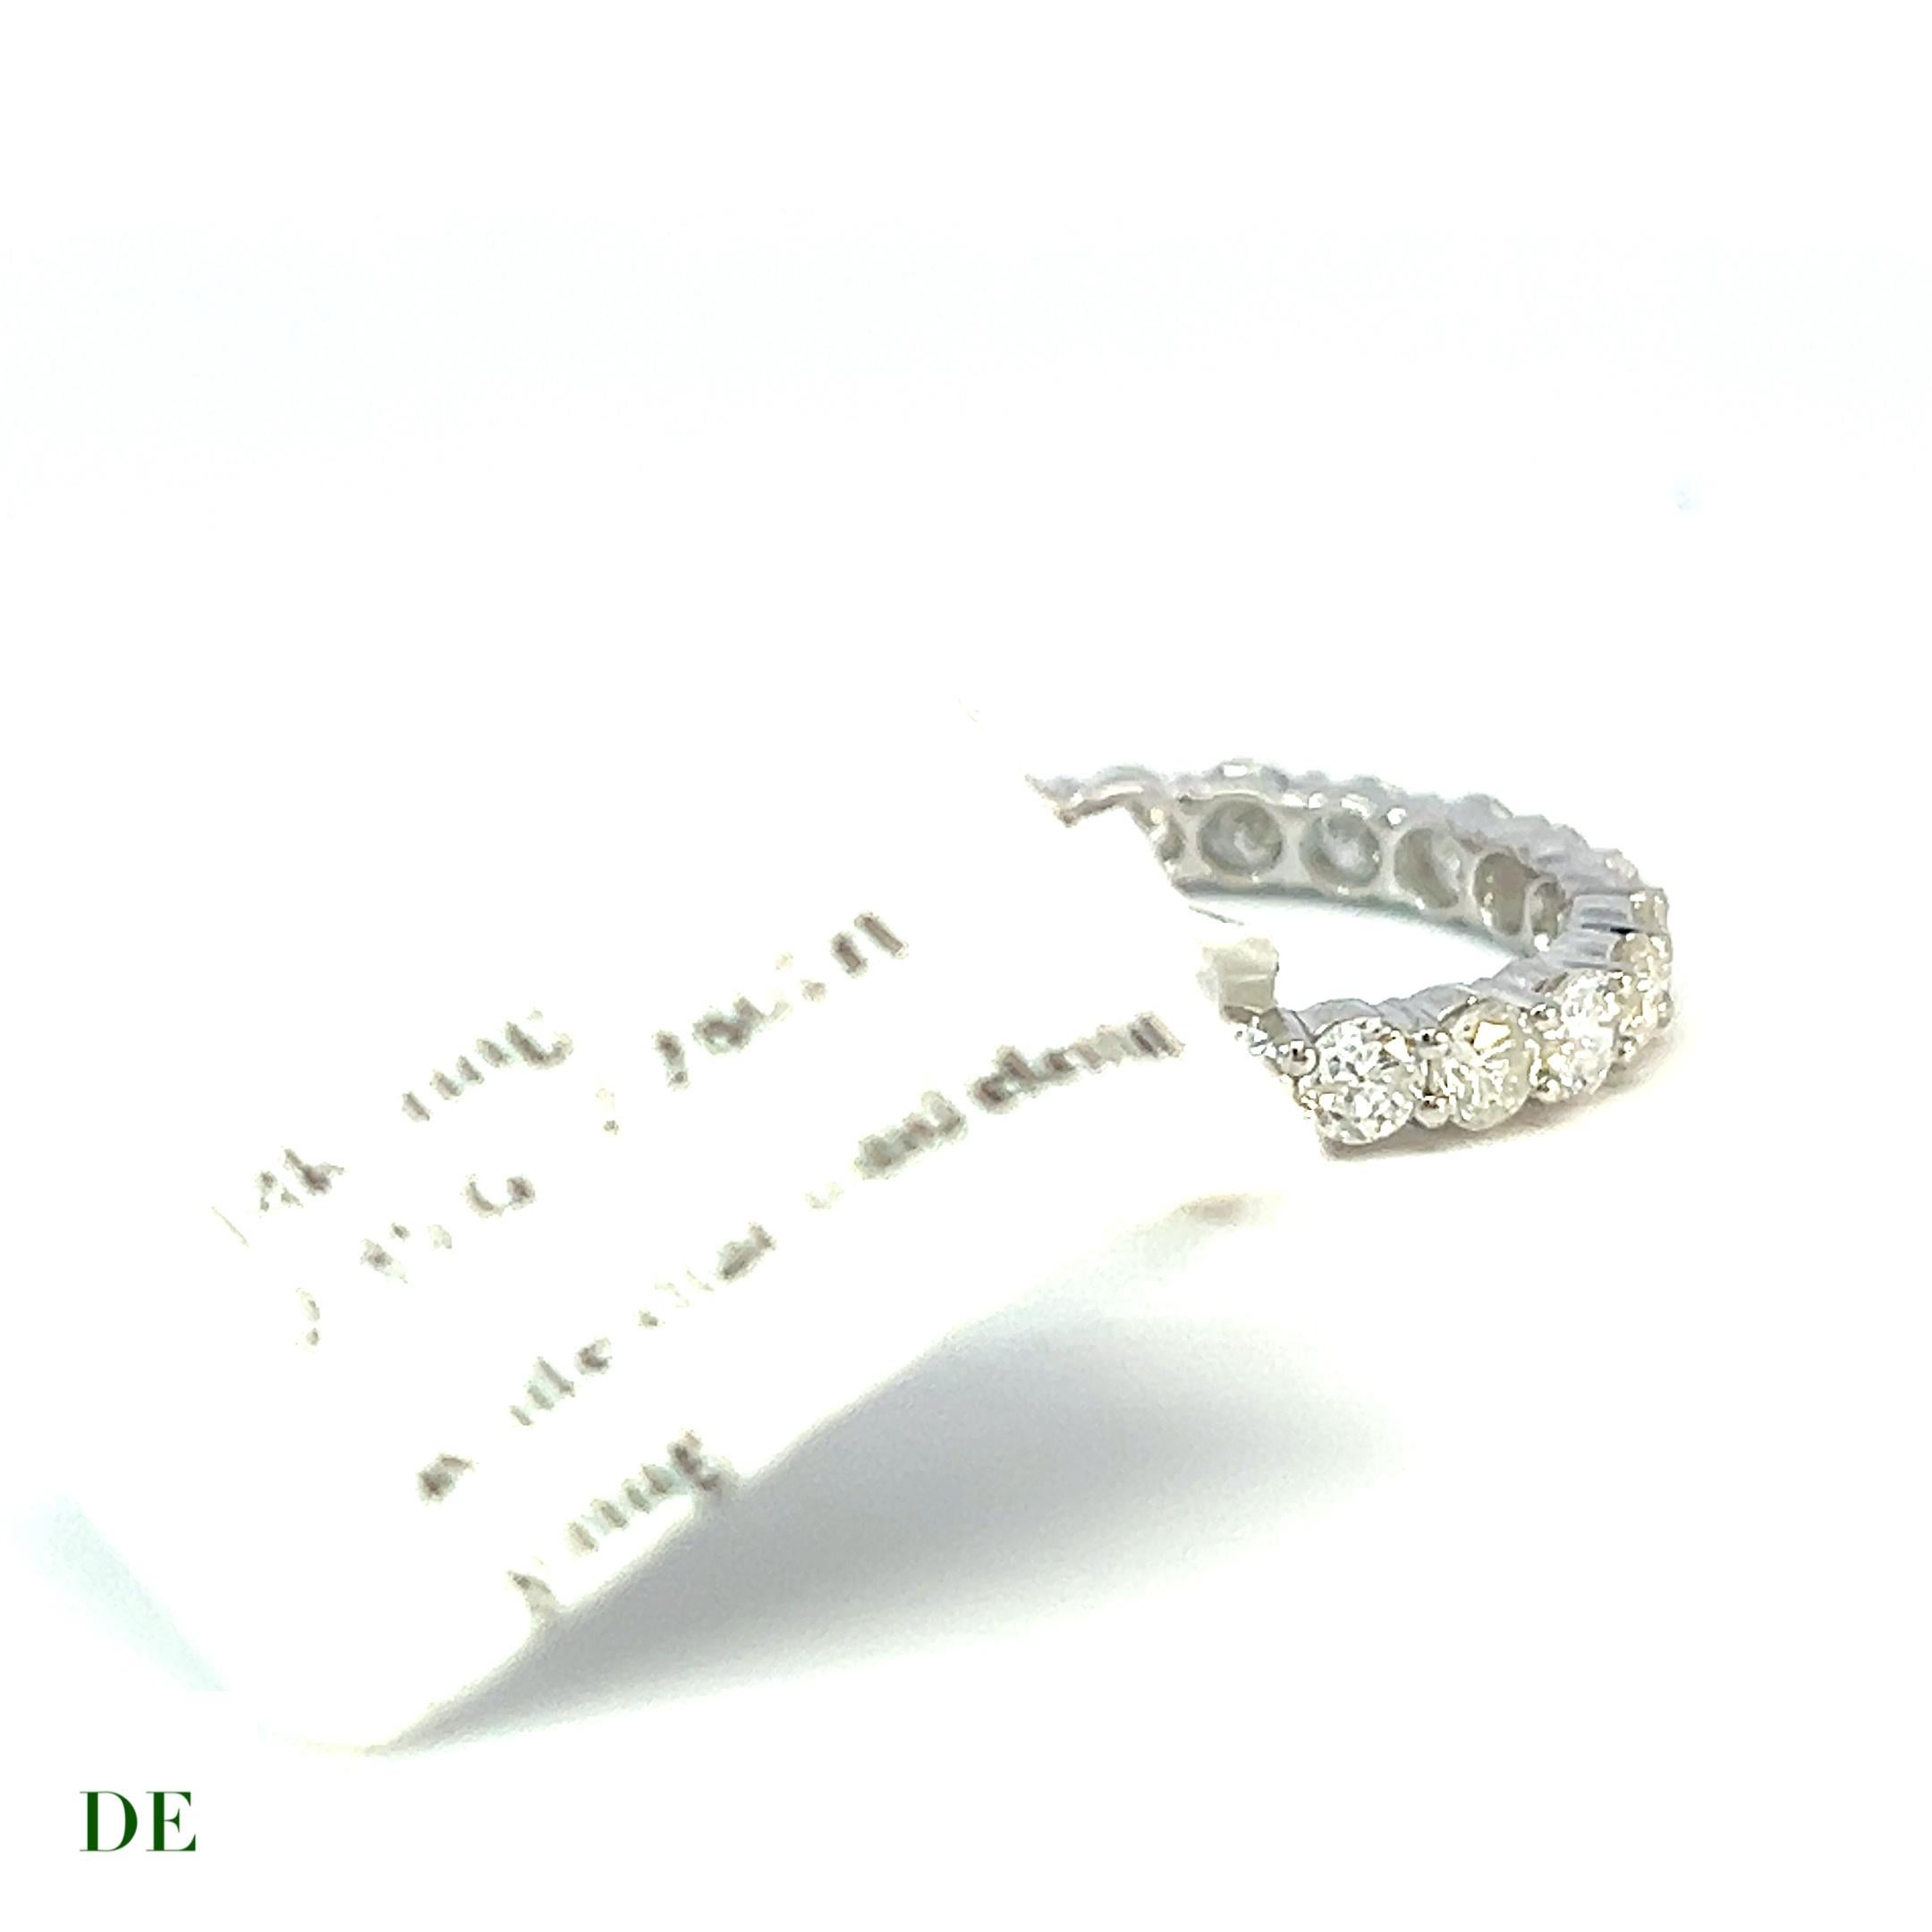 Classic 14k Gold 2.286 Carat Elegant Eternity Band Diamond Ring

Introducing the Classic 14k Gold 2.286 Carat Elegant Eternity Band Diamond Ring. This extraordinary ring is a true embodiment of luxury, elegance, and everlasting beauty.

Expertly